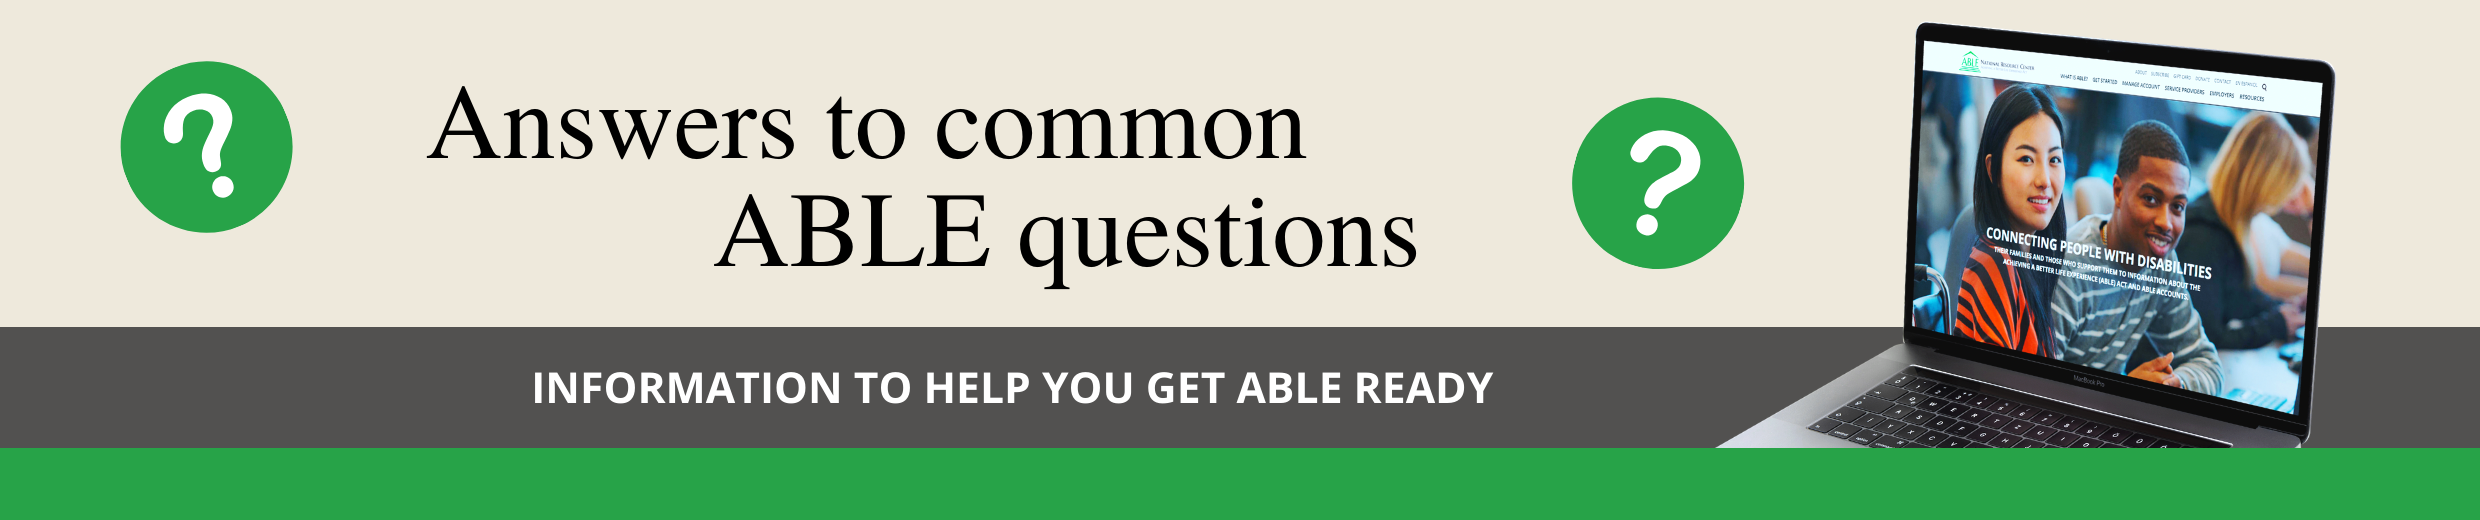 Answers to common ABLE questions, Information to help you get ABLE ready